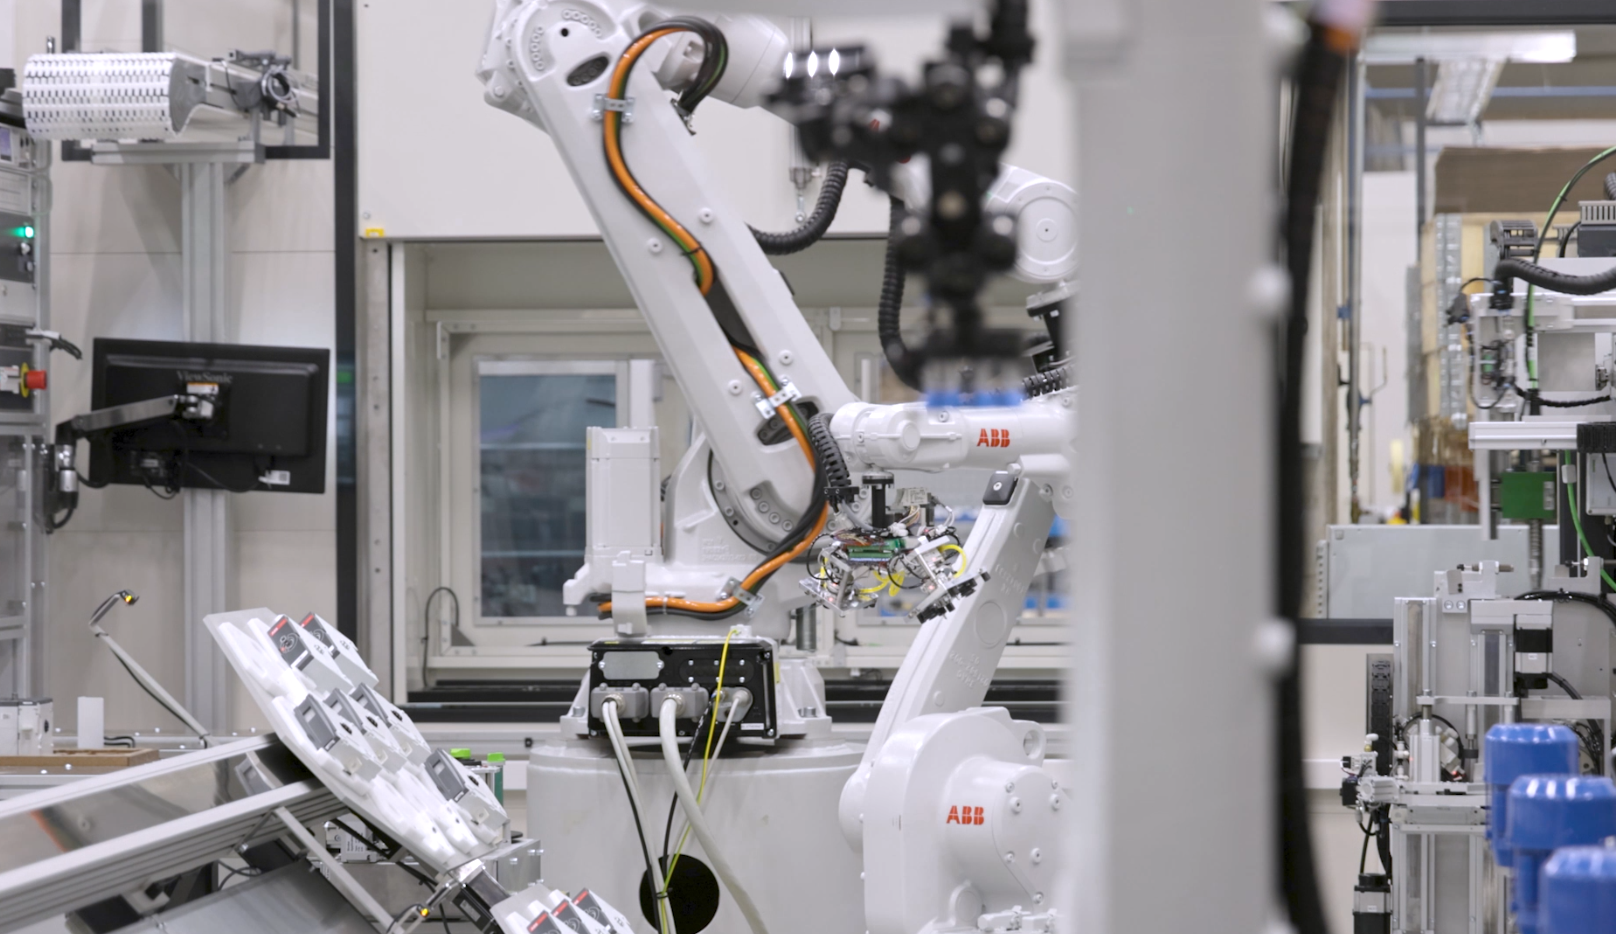 ABB turns to JOT Automation for a custom automation assembly line to increase production by 5 times